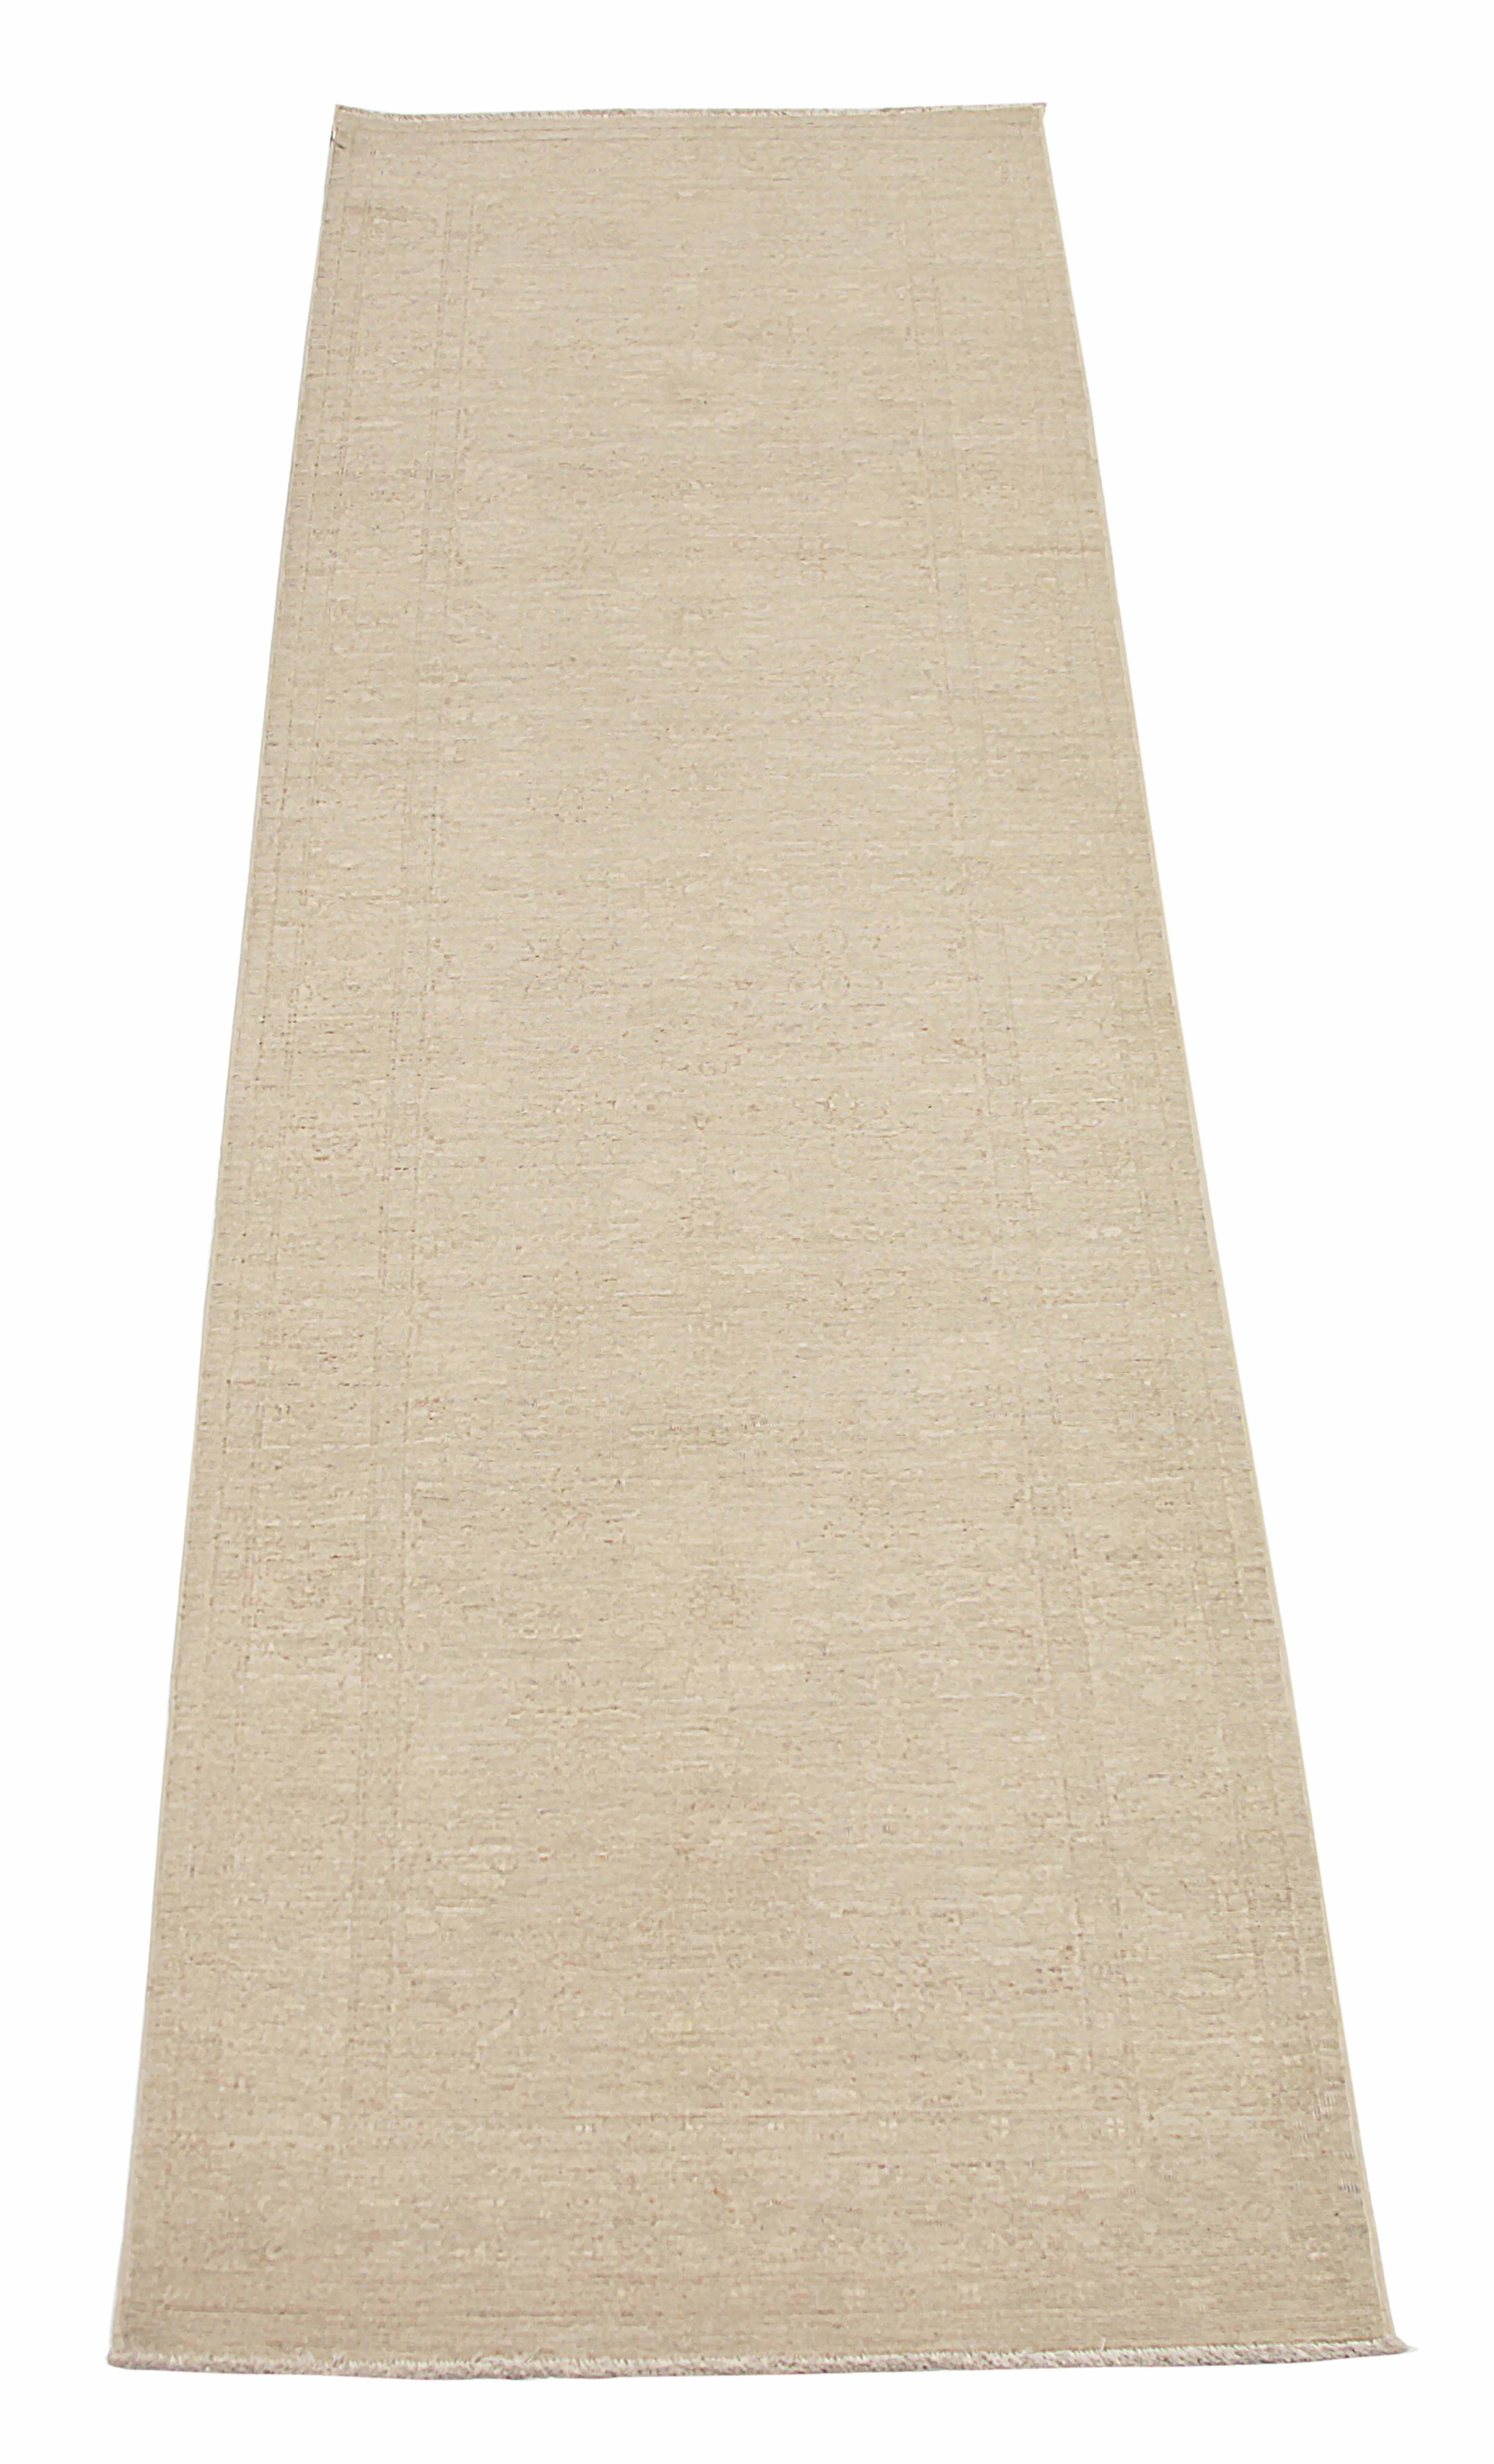 New afghan runner rug handwoven from the finest sheep’s wool. It’s colored with all-natural vegetable dyes that are safe for humans and pets. It’s a traditional Tabriz design handwoven by expert artisans. It’s a lovely runner rug that can be